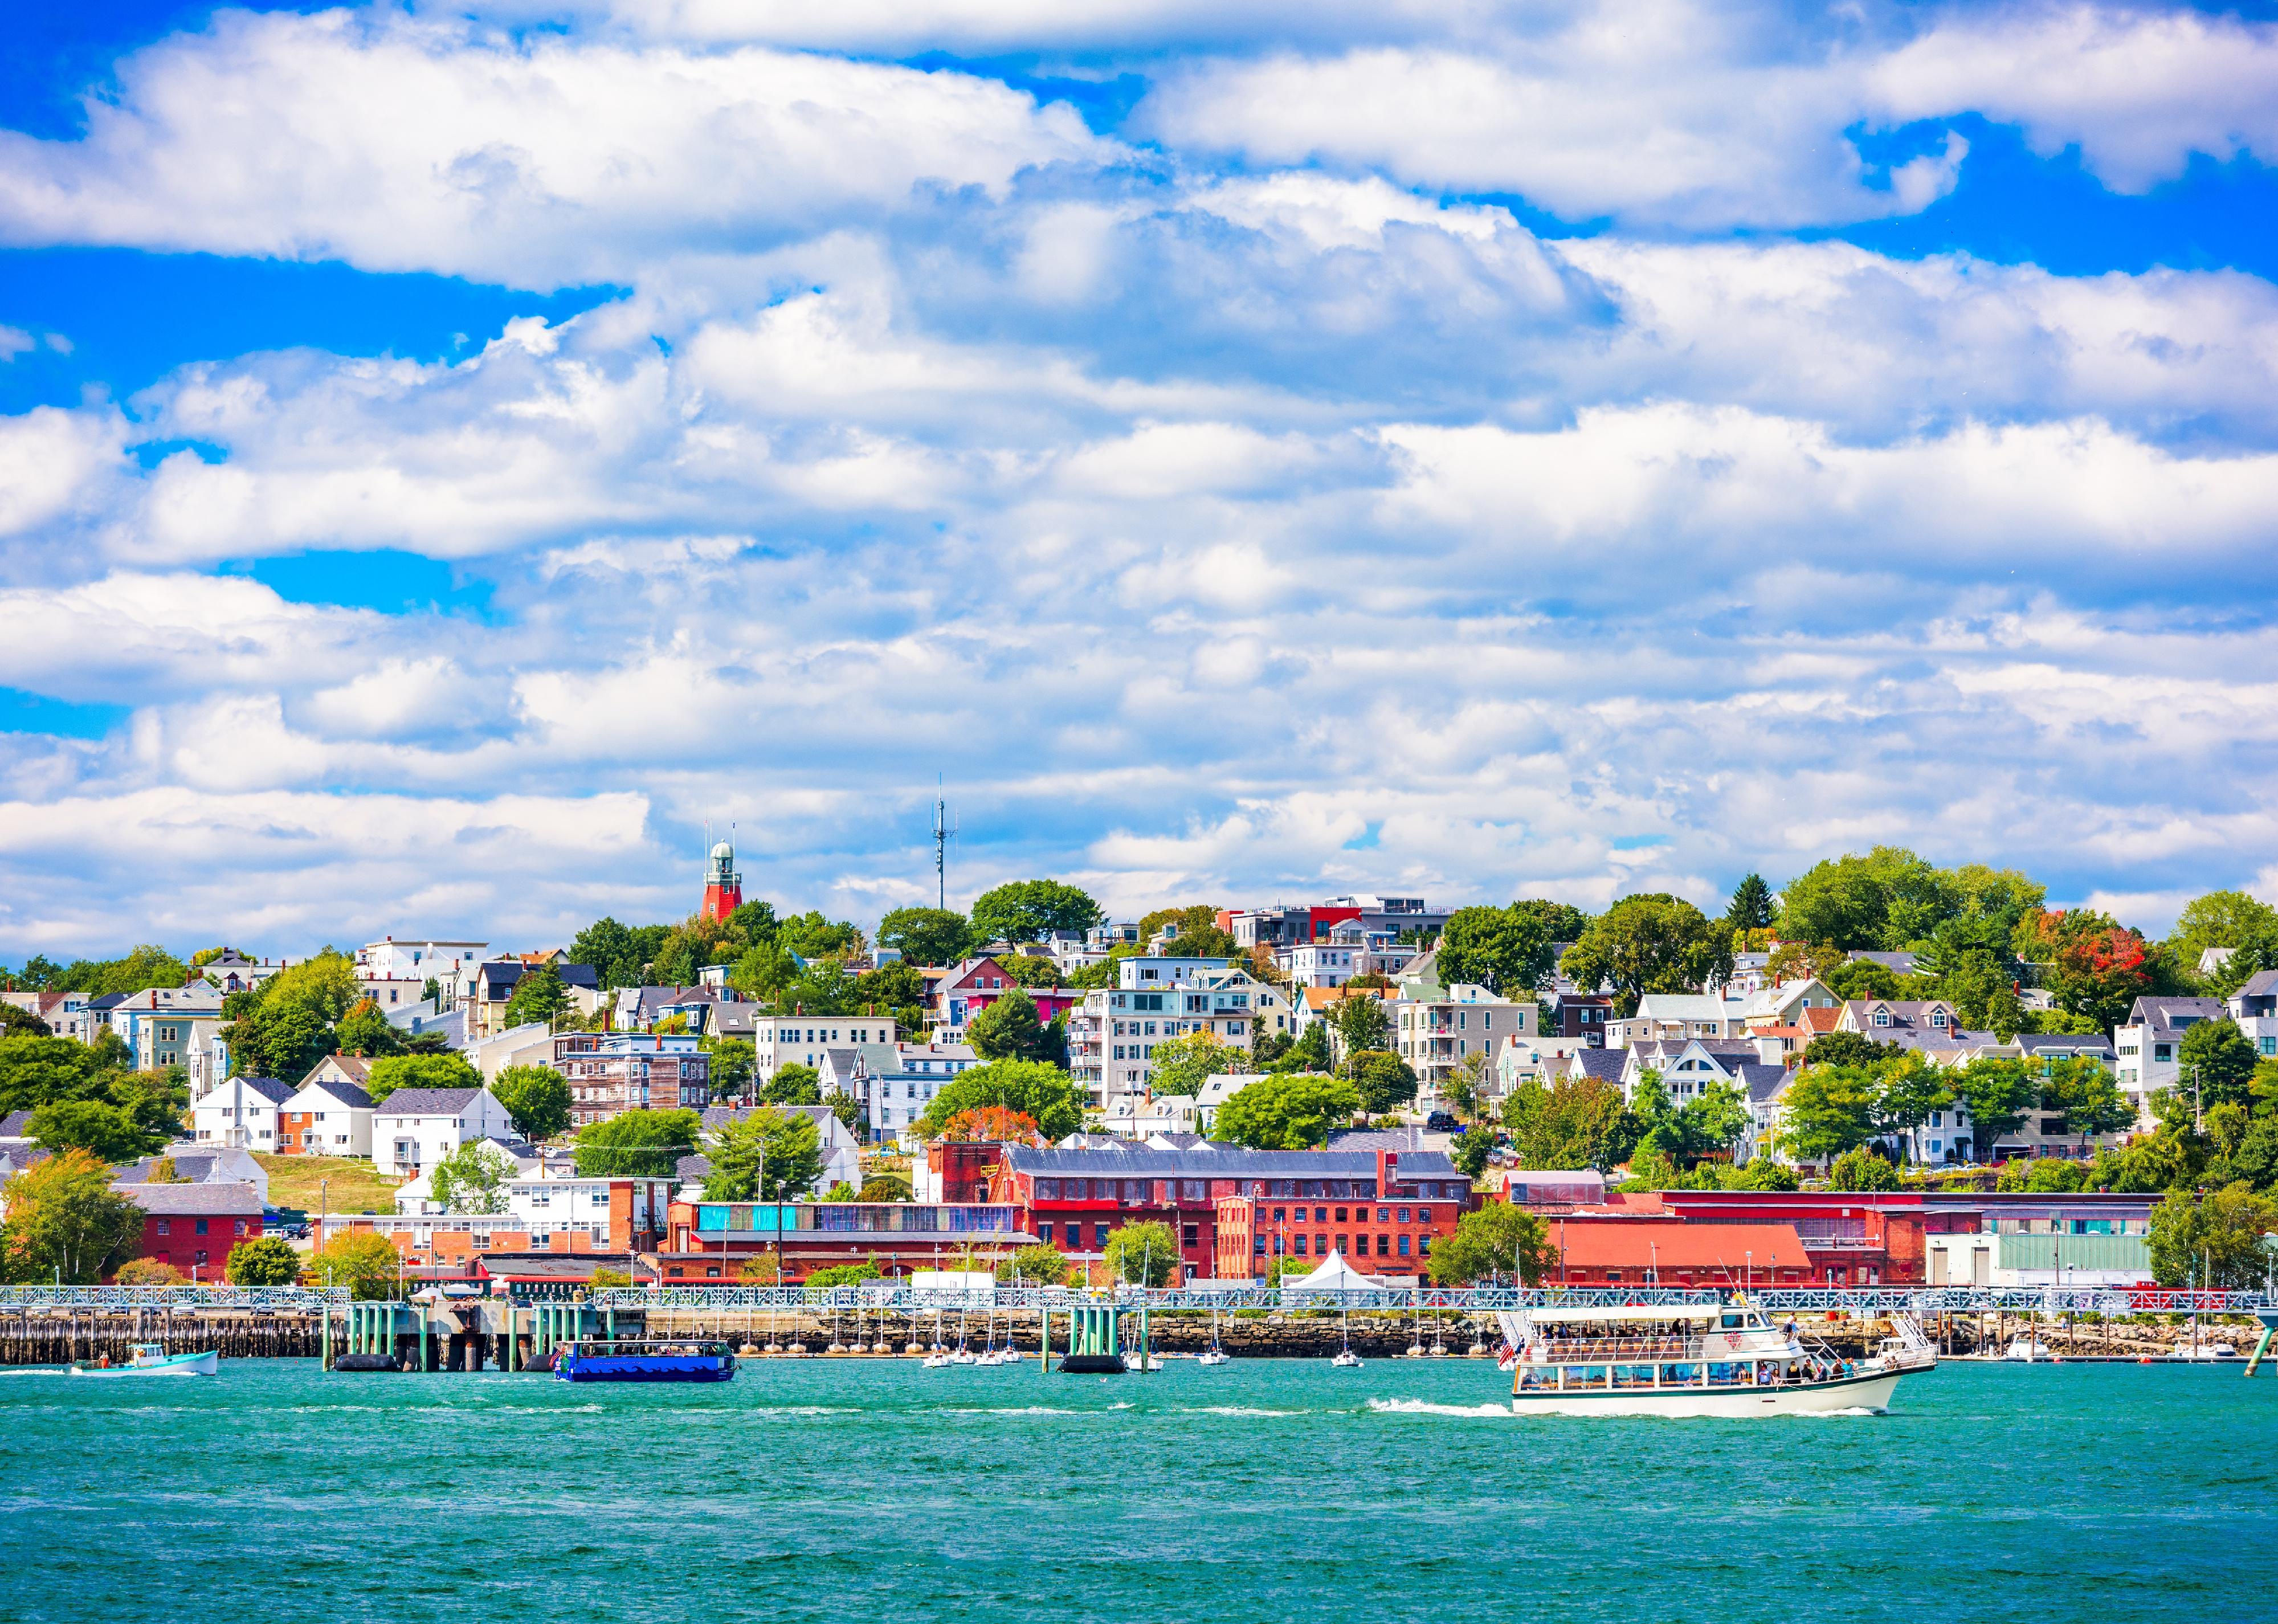 The colorful waterfront in Portland, Maine.